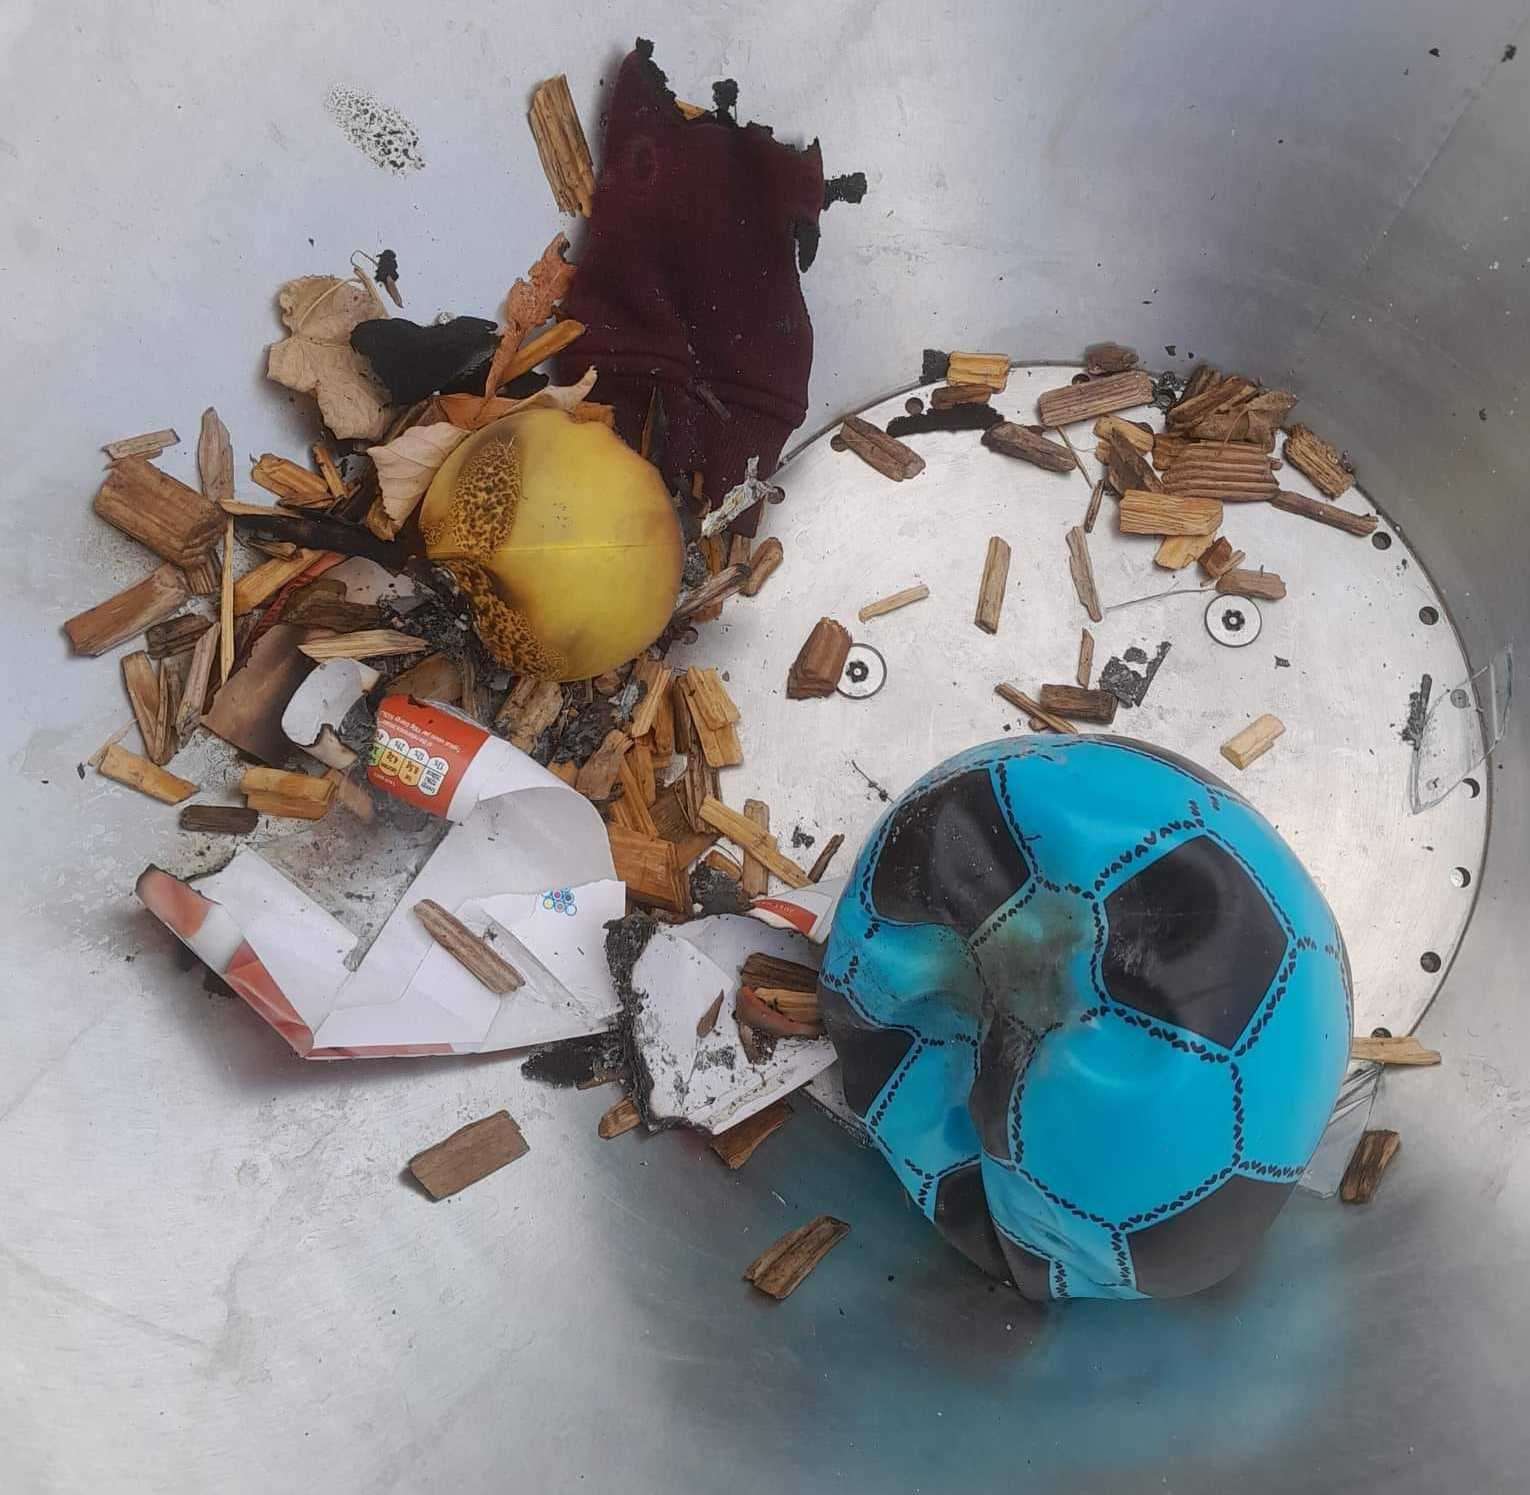 Items were burned on children's play equipment at the park next to Selling Primary School